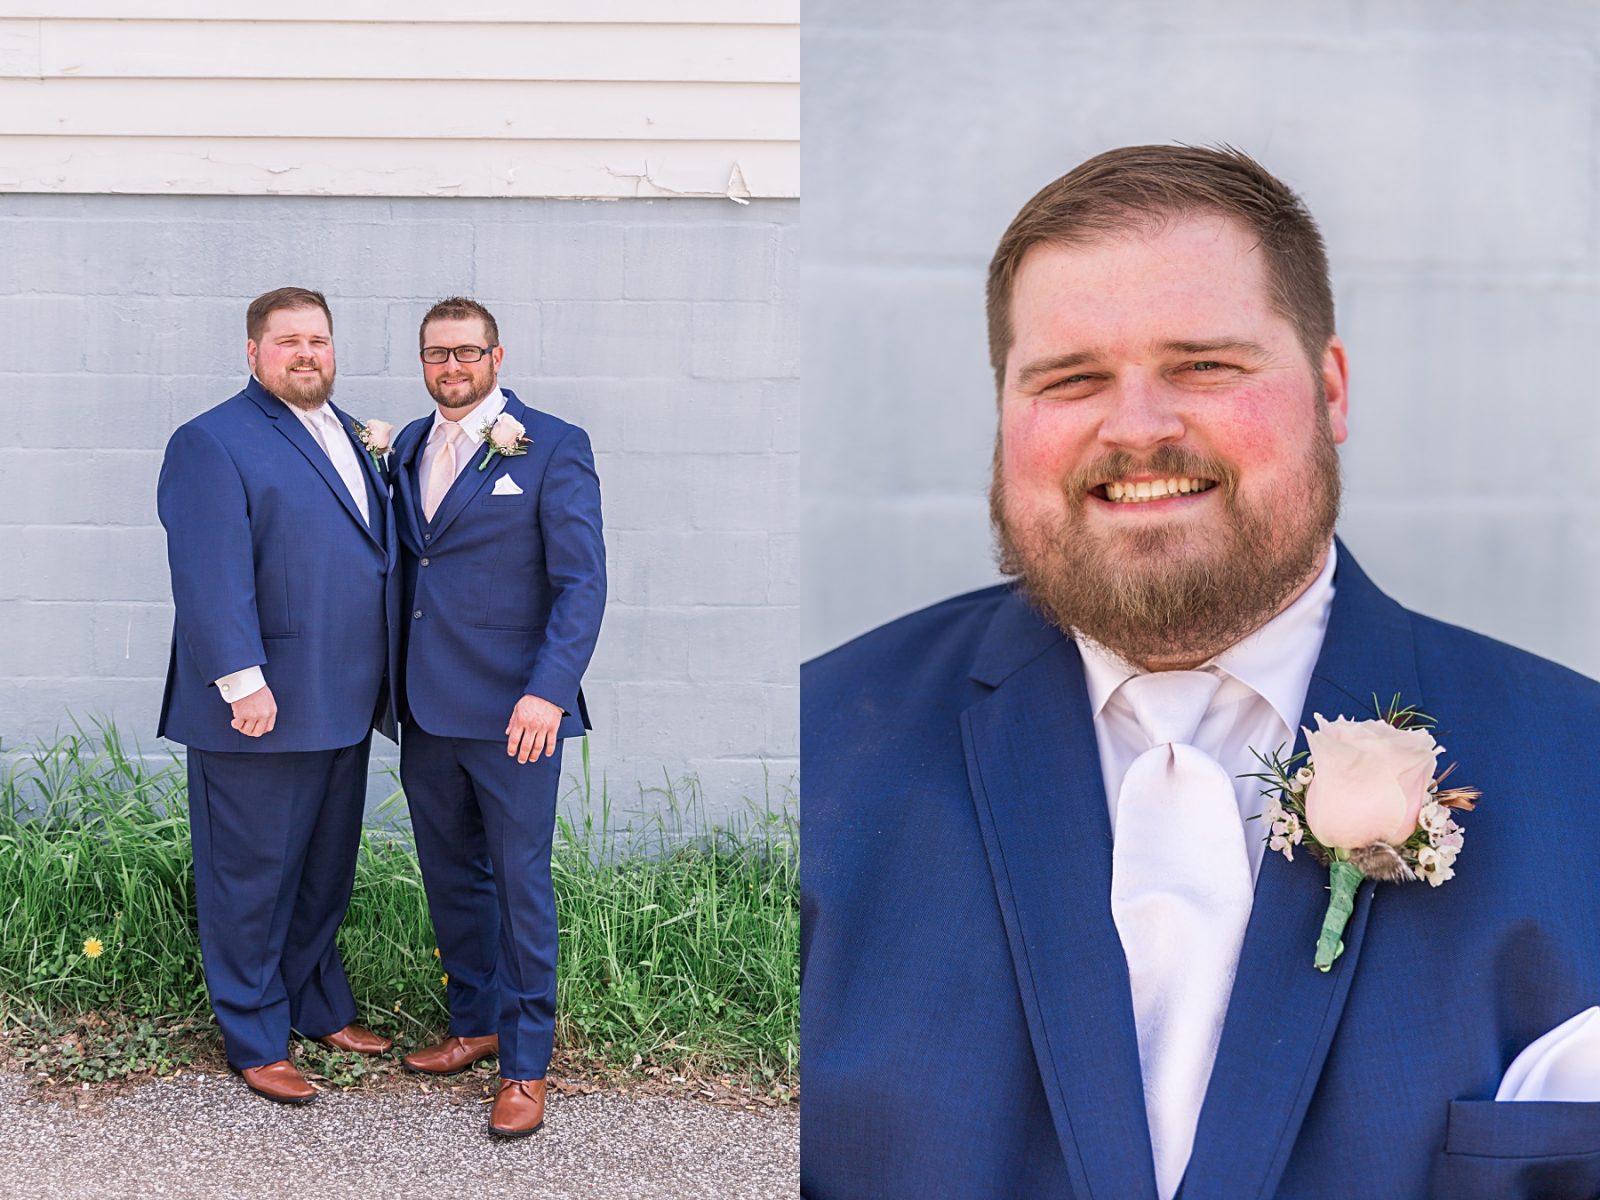 Wedding photography by Diana Gramlich, grrom and best man in blue suits